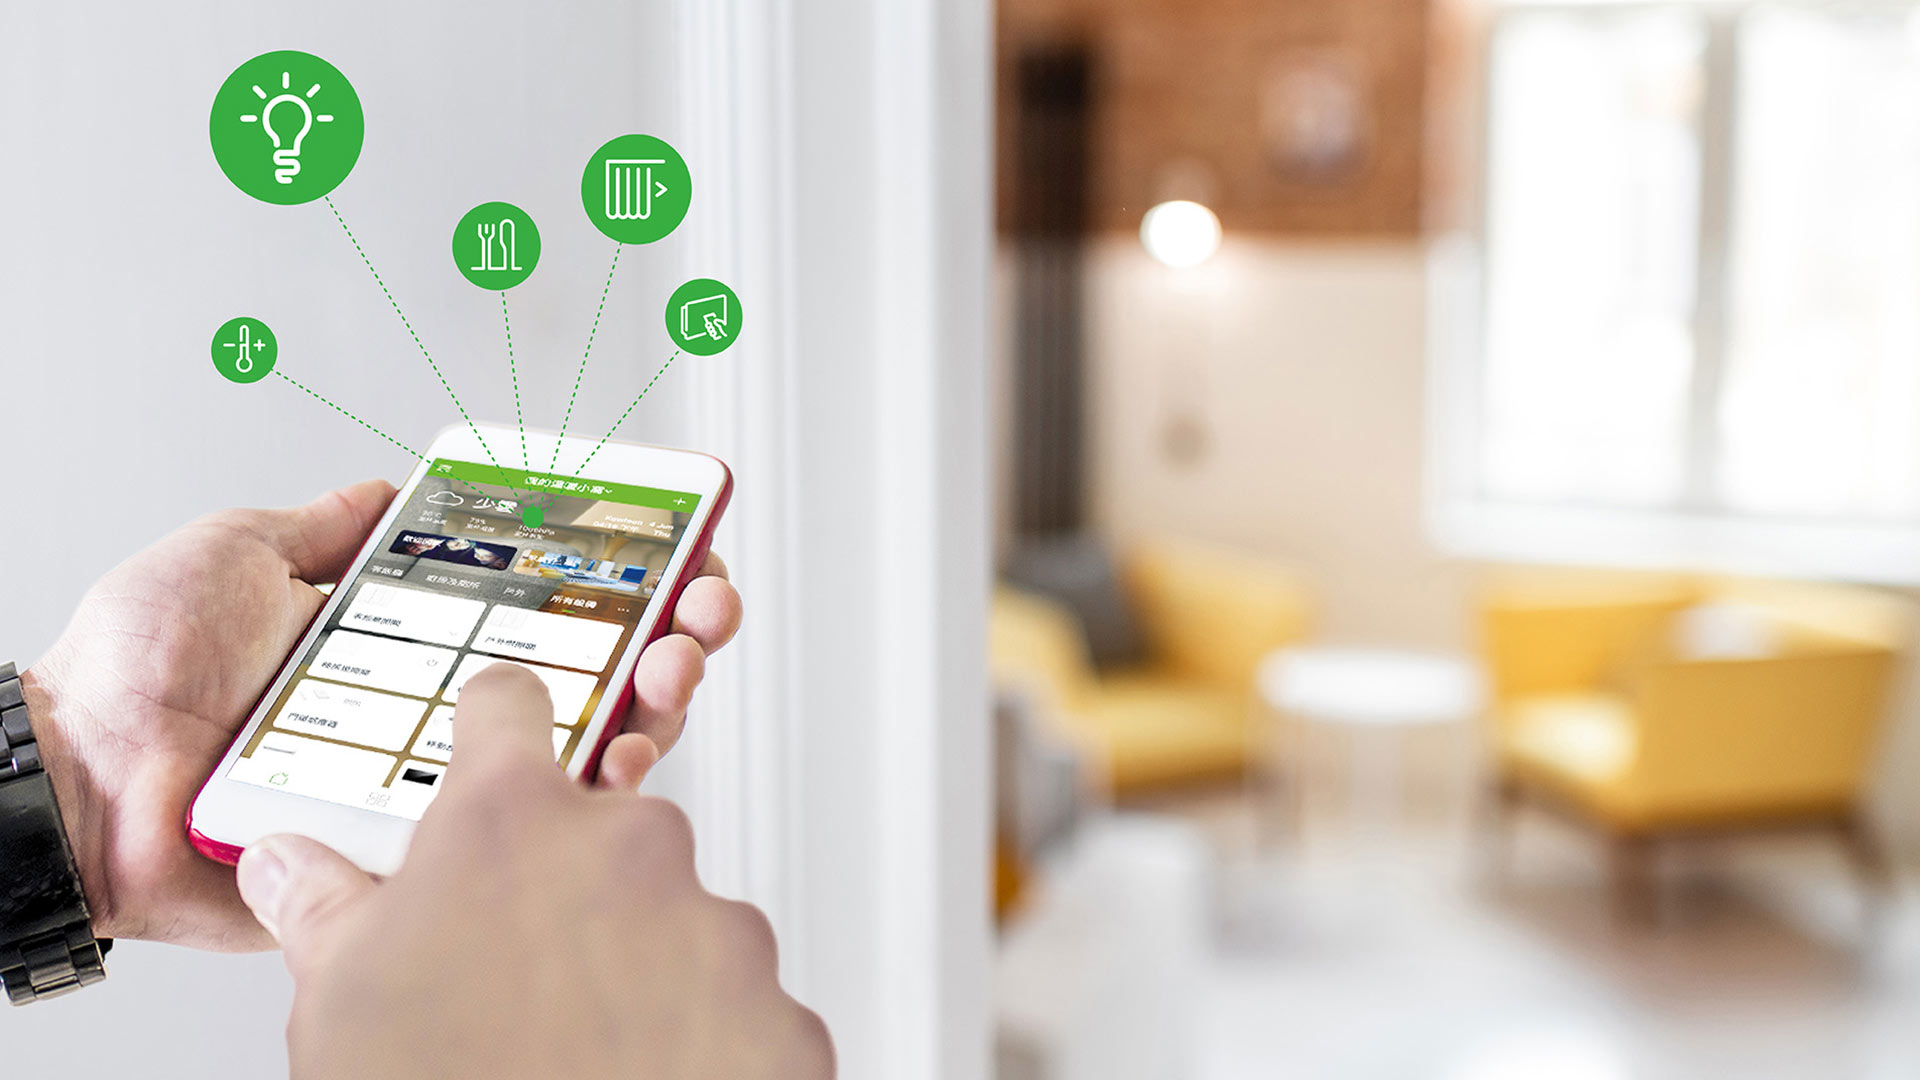 Schneider Electric - Did you know that Wiser smart home solutions